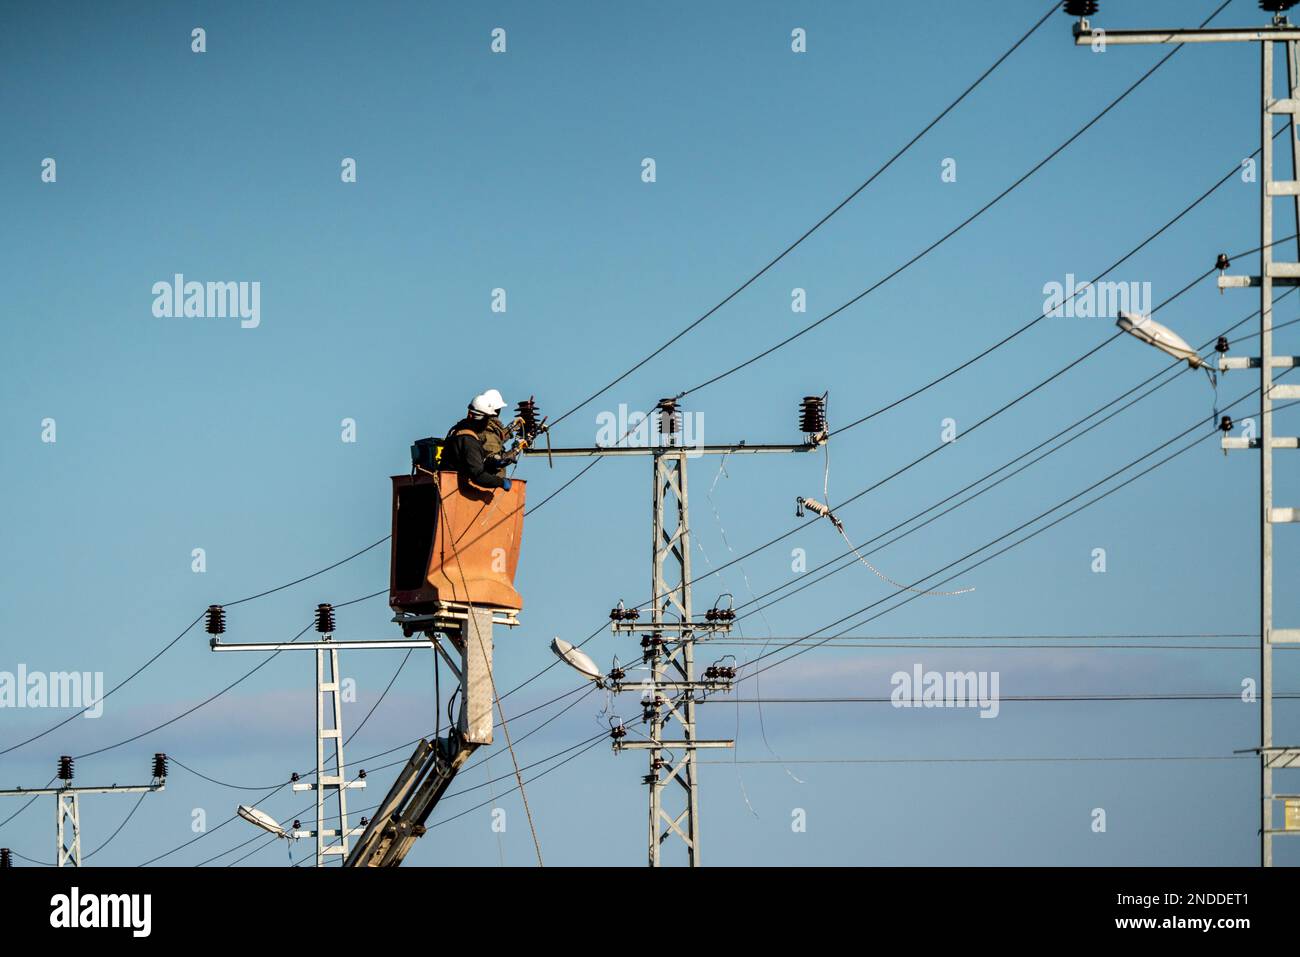 Electrical workers are making a high voltage connection. Electricity poles and cables. Stock Photo